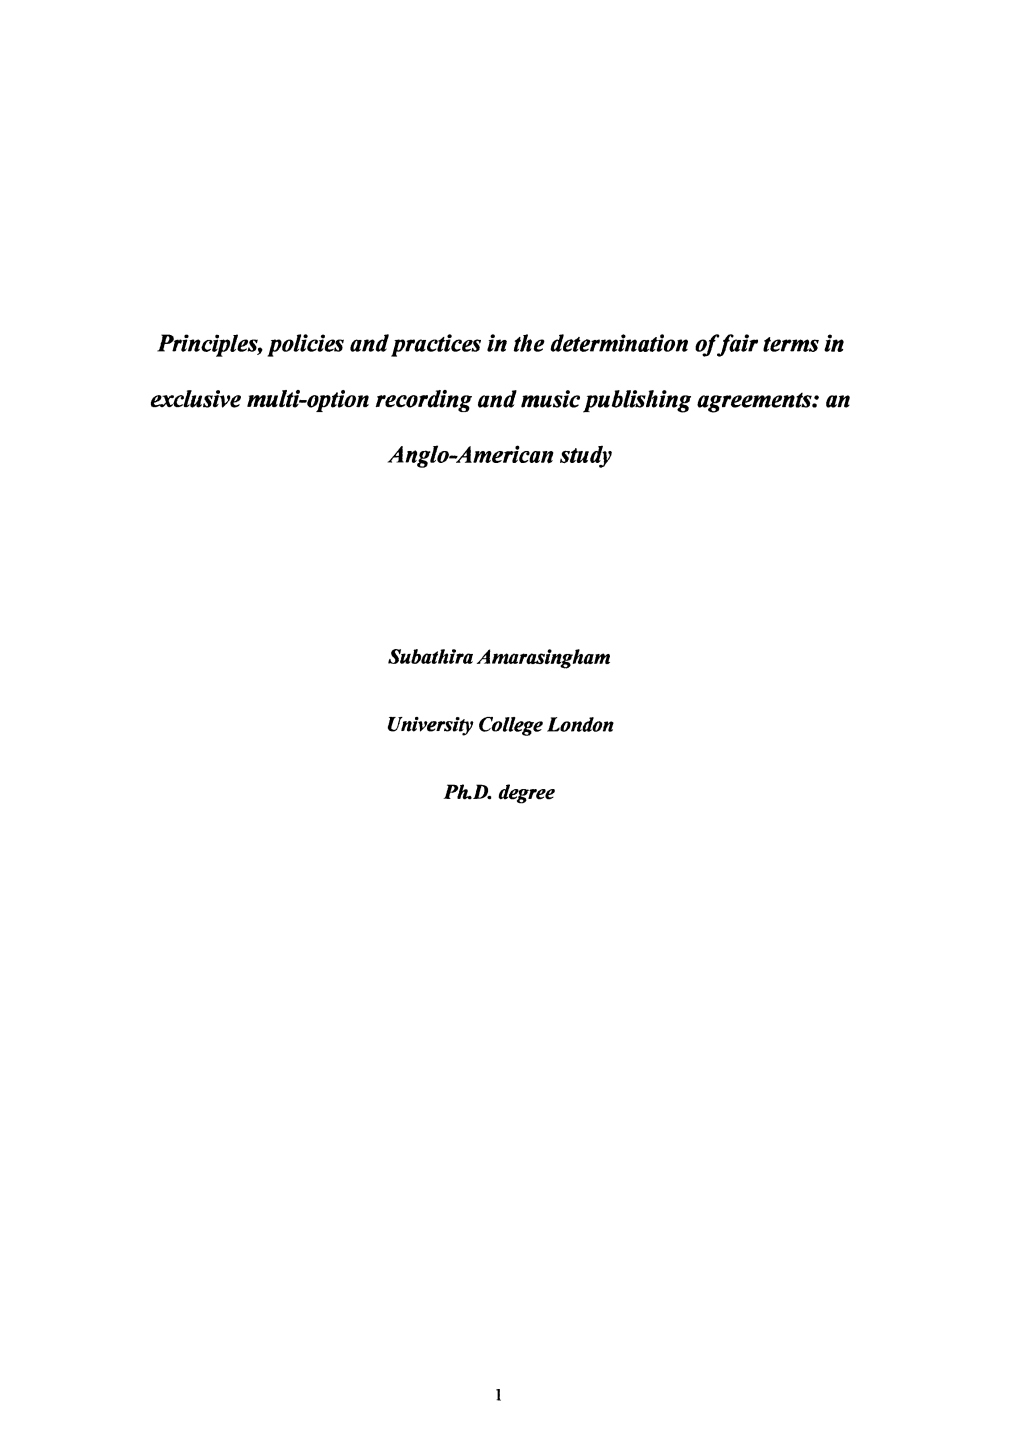 Principles, Policies and Practices in the Determination of Fair Terms in Exclusive Multi-Option Recording and Music Publishing Agreements: An